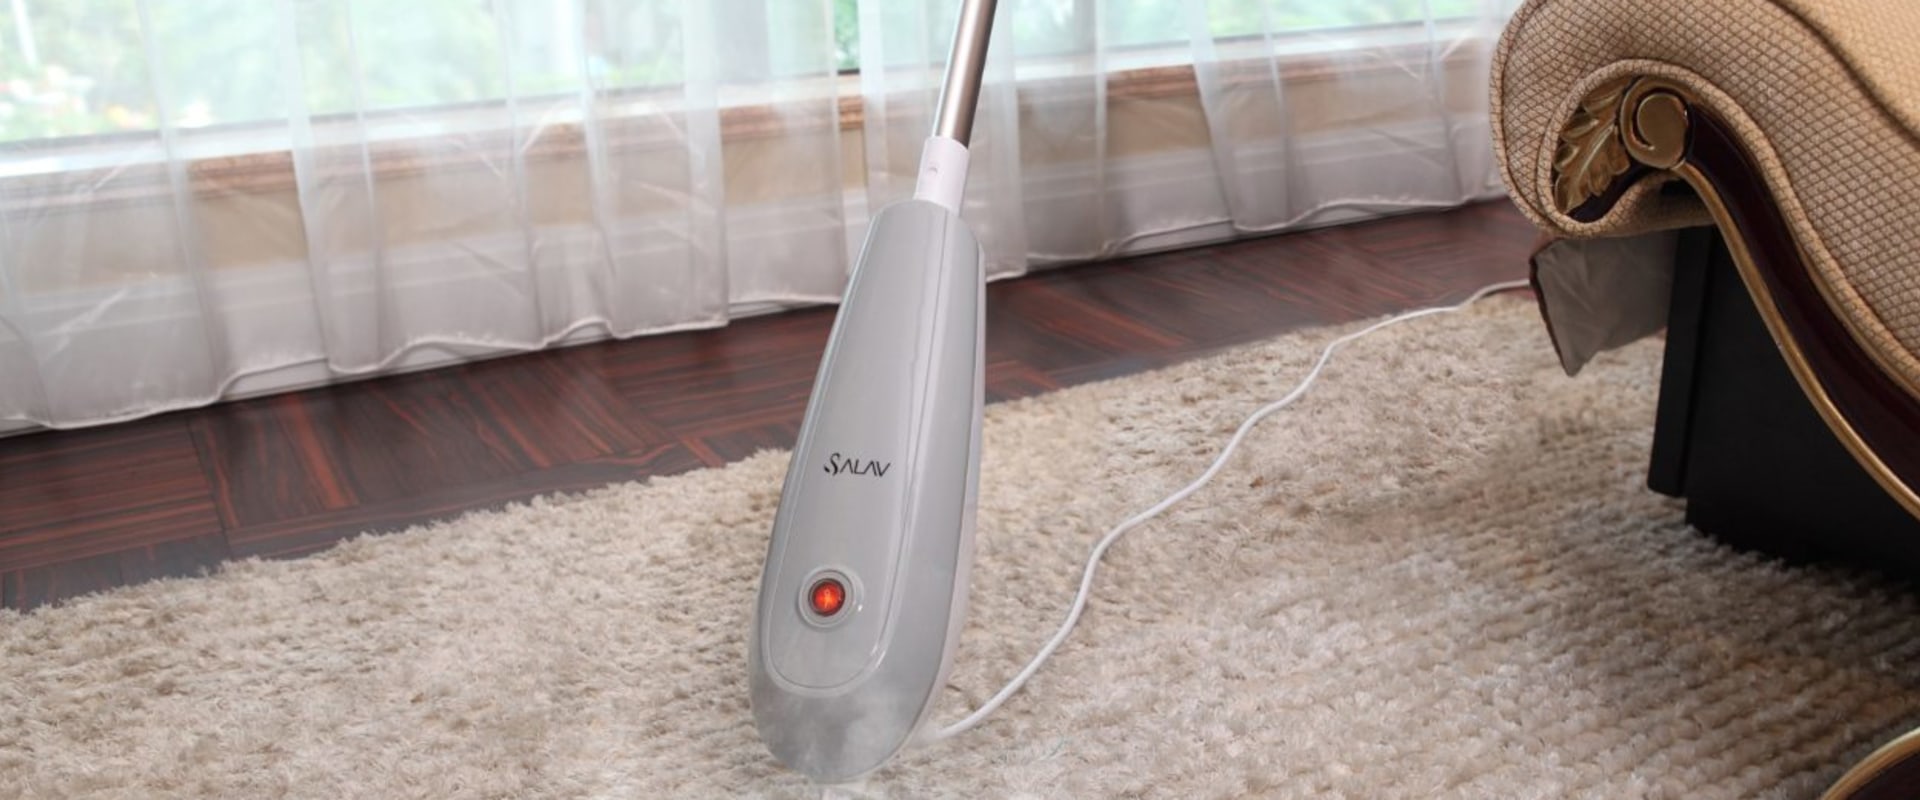 Do Professional Carpet Cleaners Use Steam? - A Comprehensive Guide